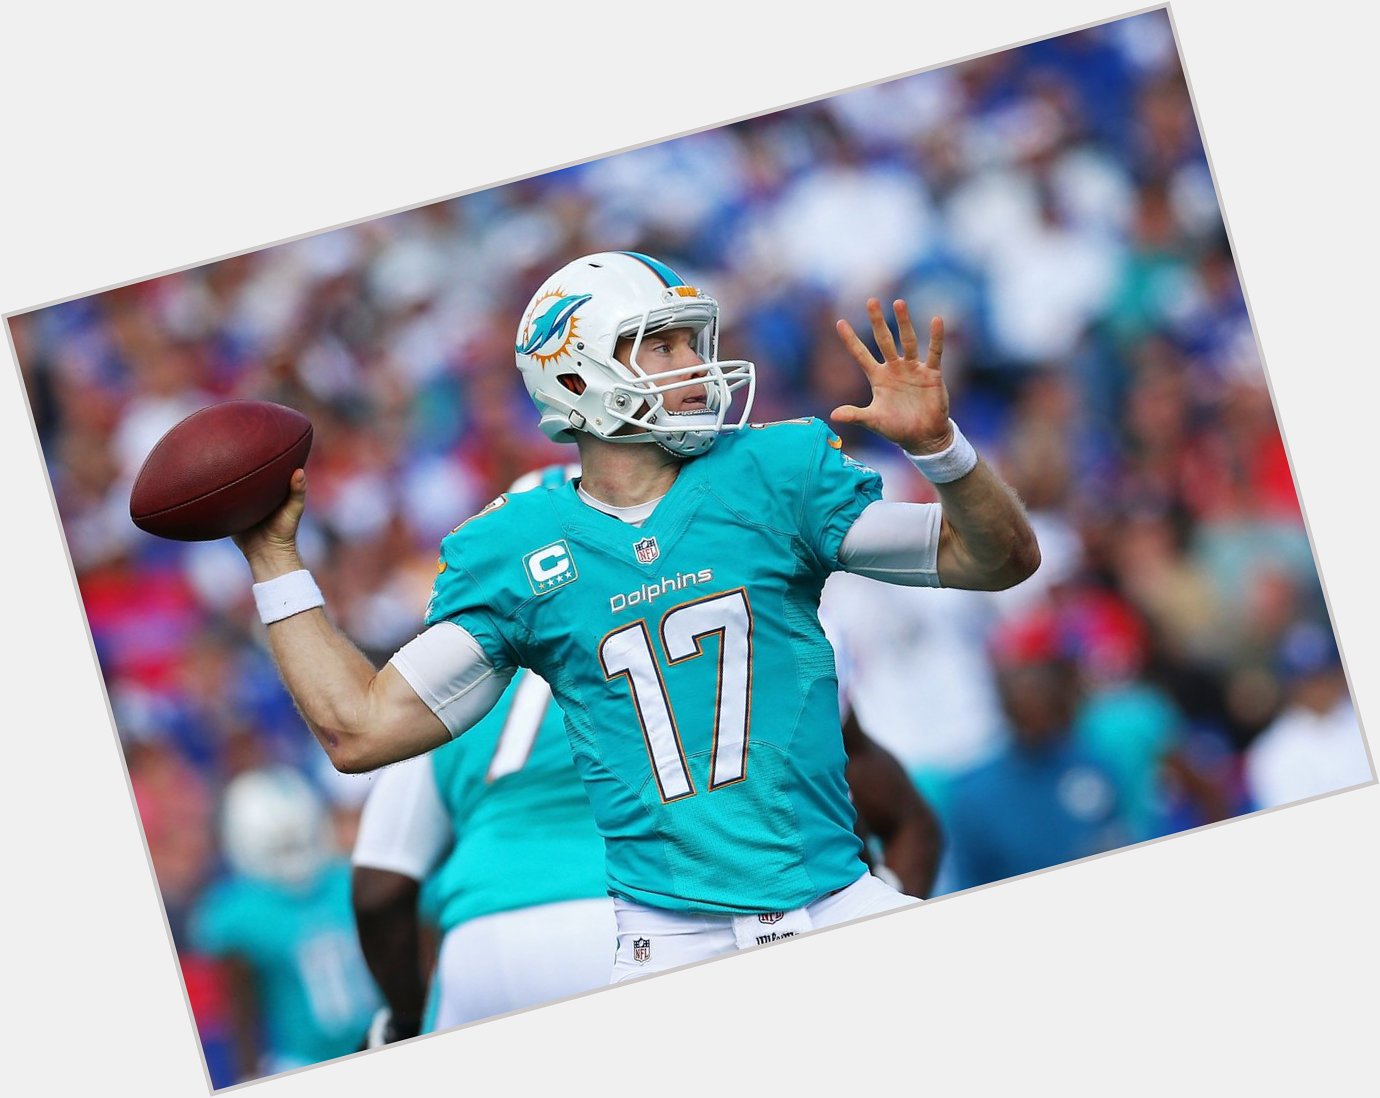 Happy Birthday to Ryan Tannehill who turns 29 today! 